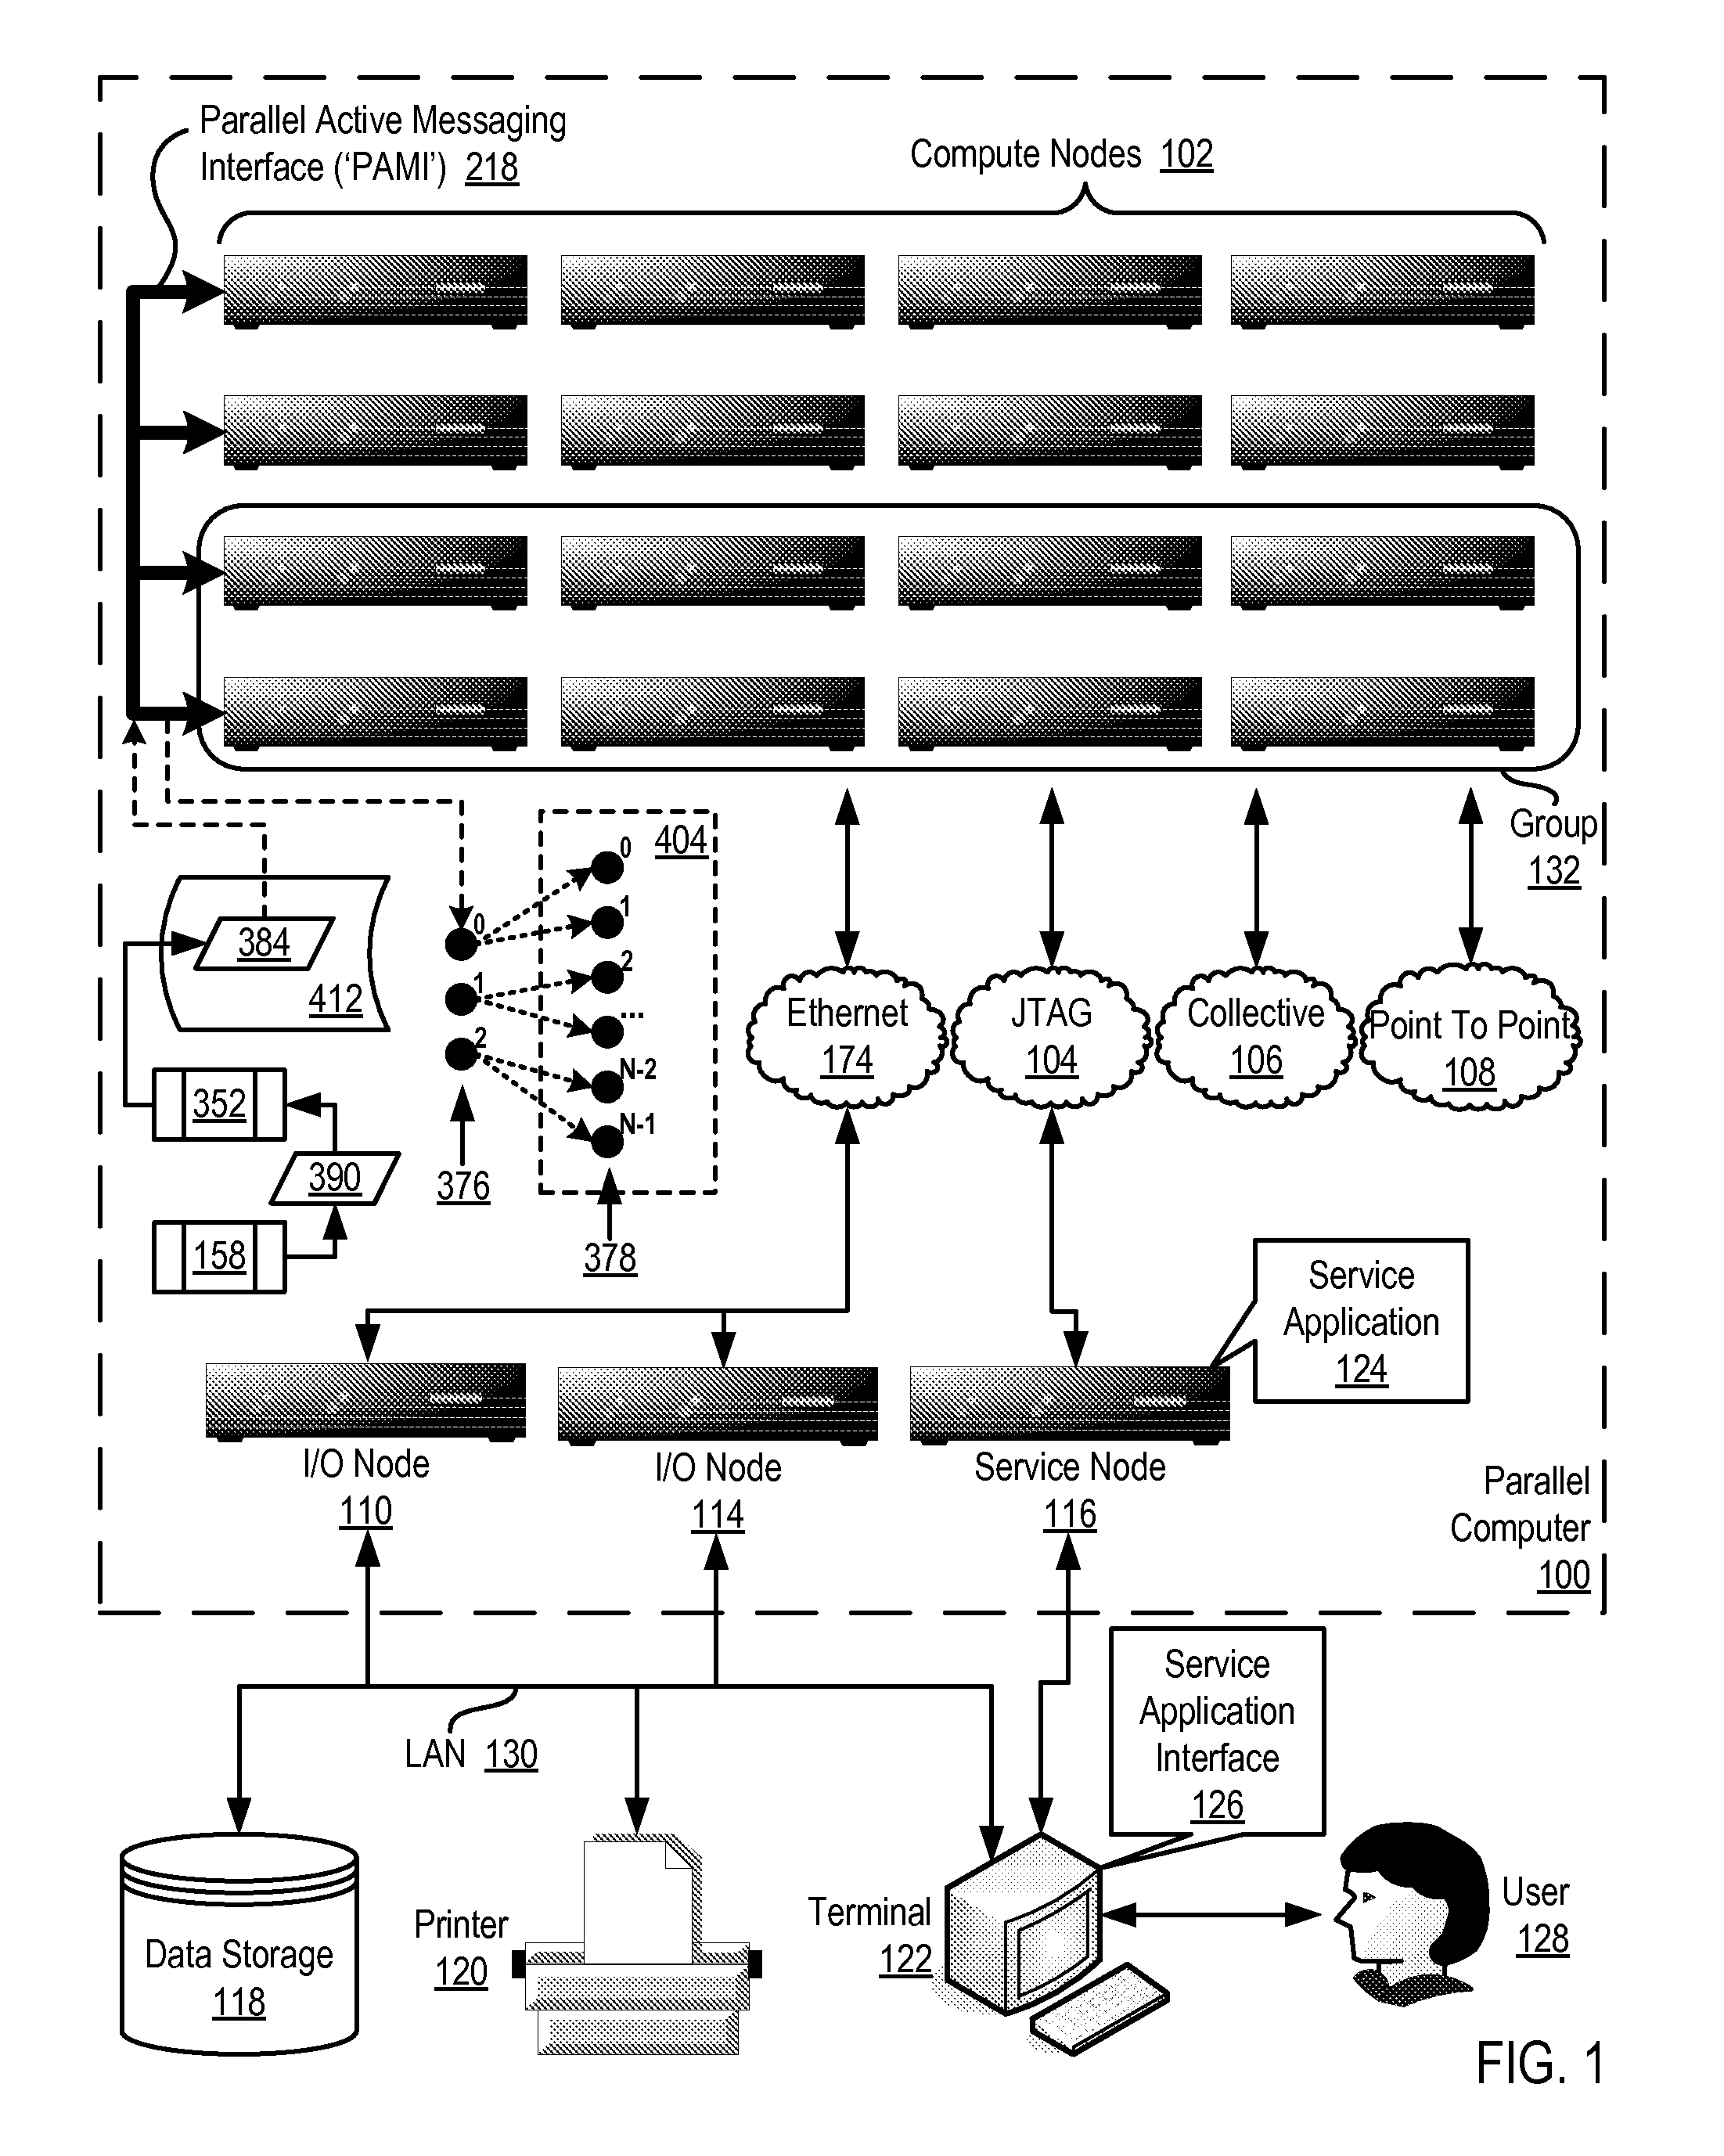 Endpoint-Based Parallel Data Processing In A Parallel Active Messaging Interface Of A Parallel Computer